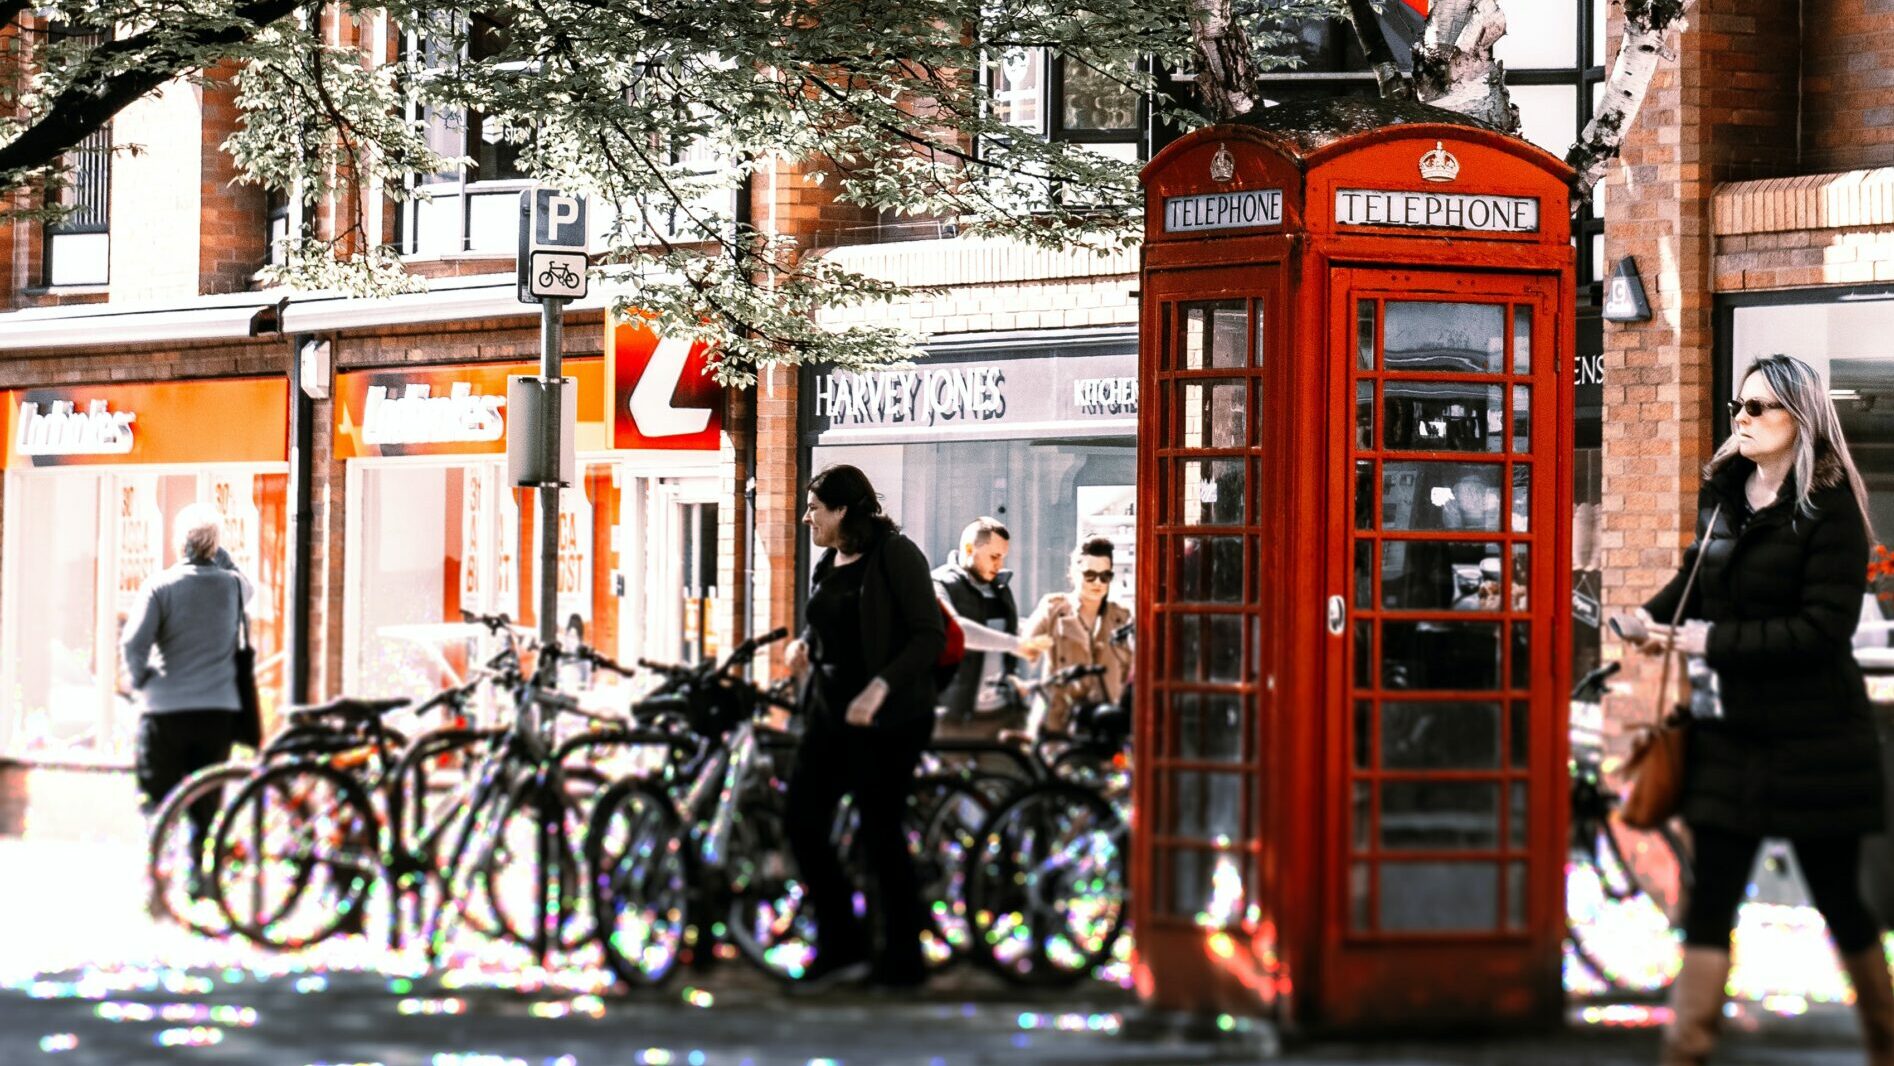 Red telephone box in town with people walking